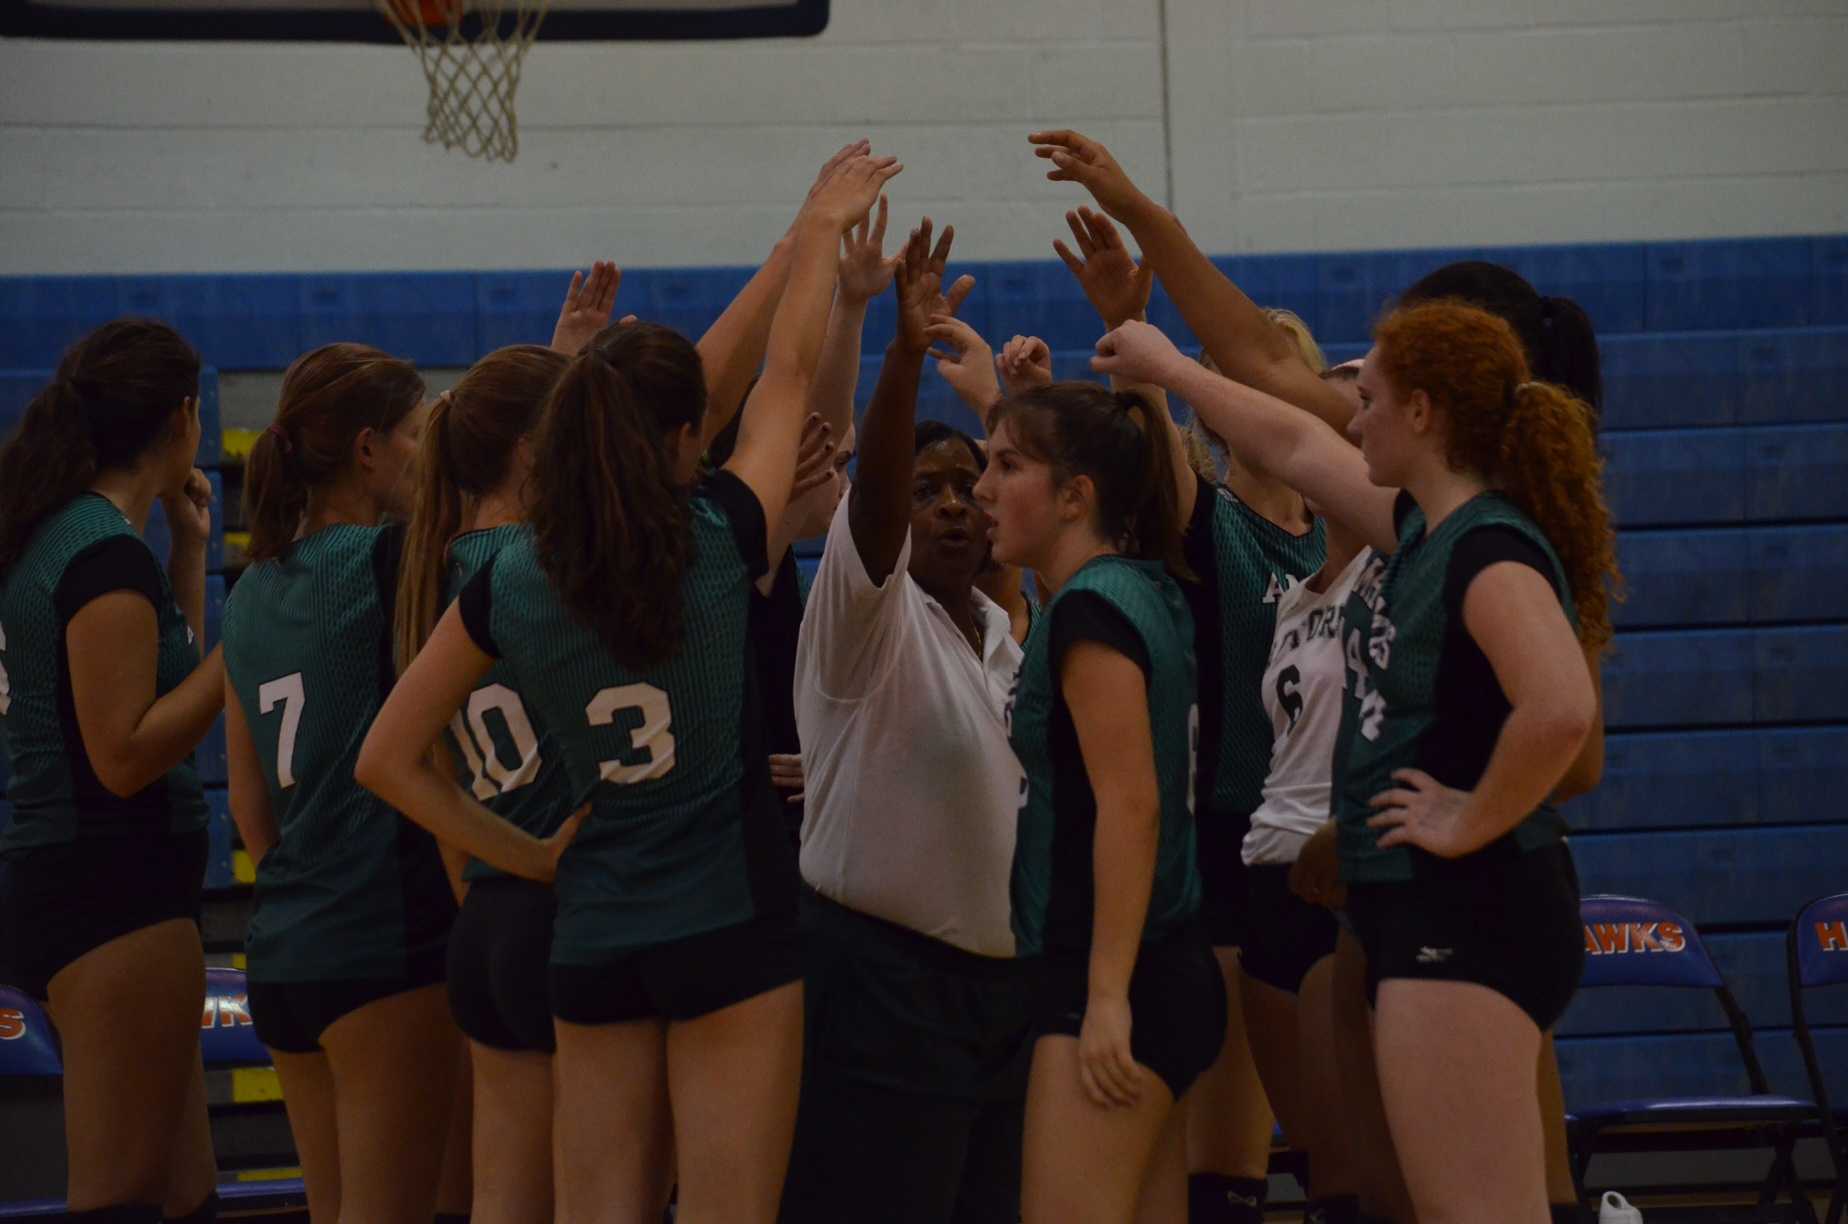 Raptor volleyball's fierce leader Coach Williams leads the team huddle before the win against the Hanahan Hawks.